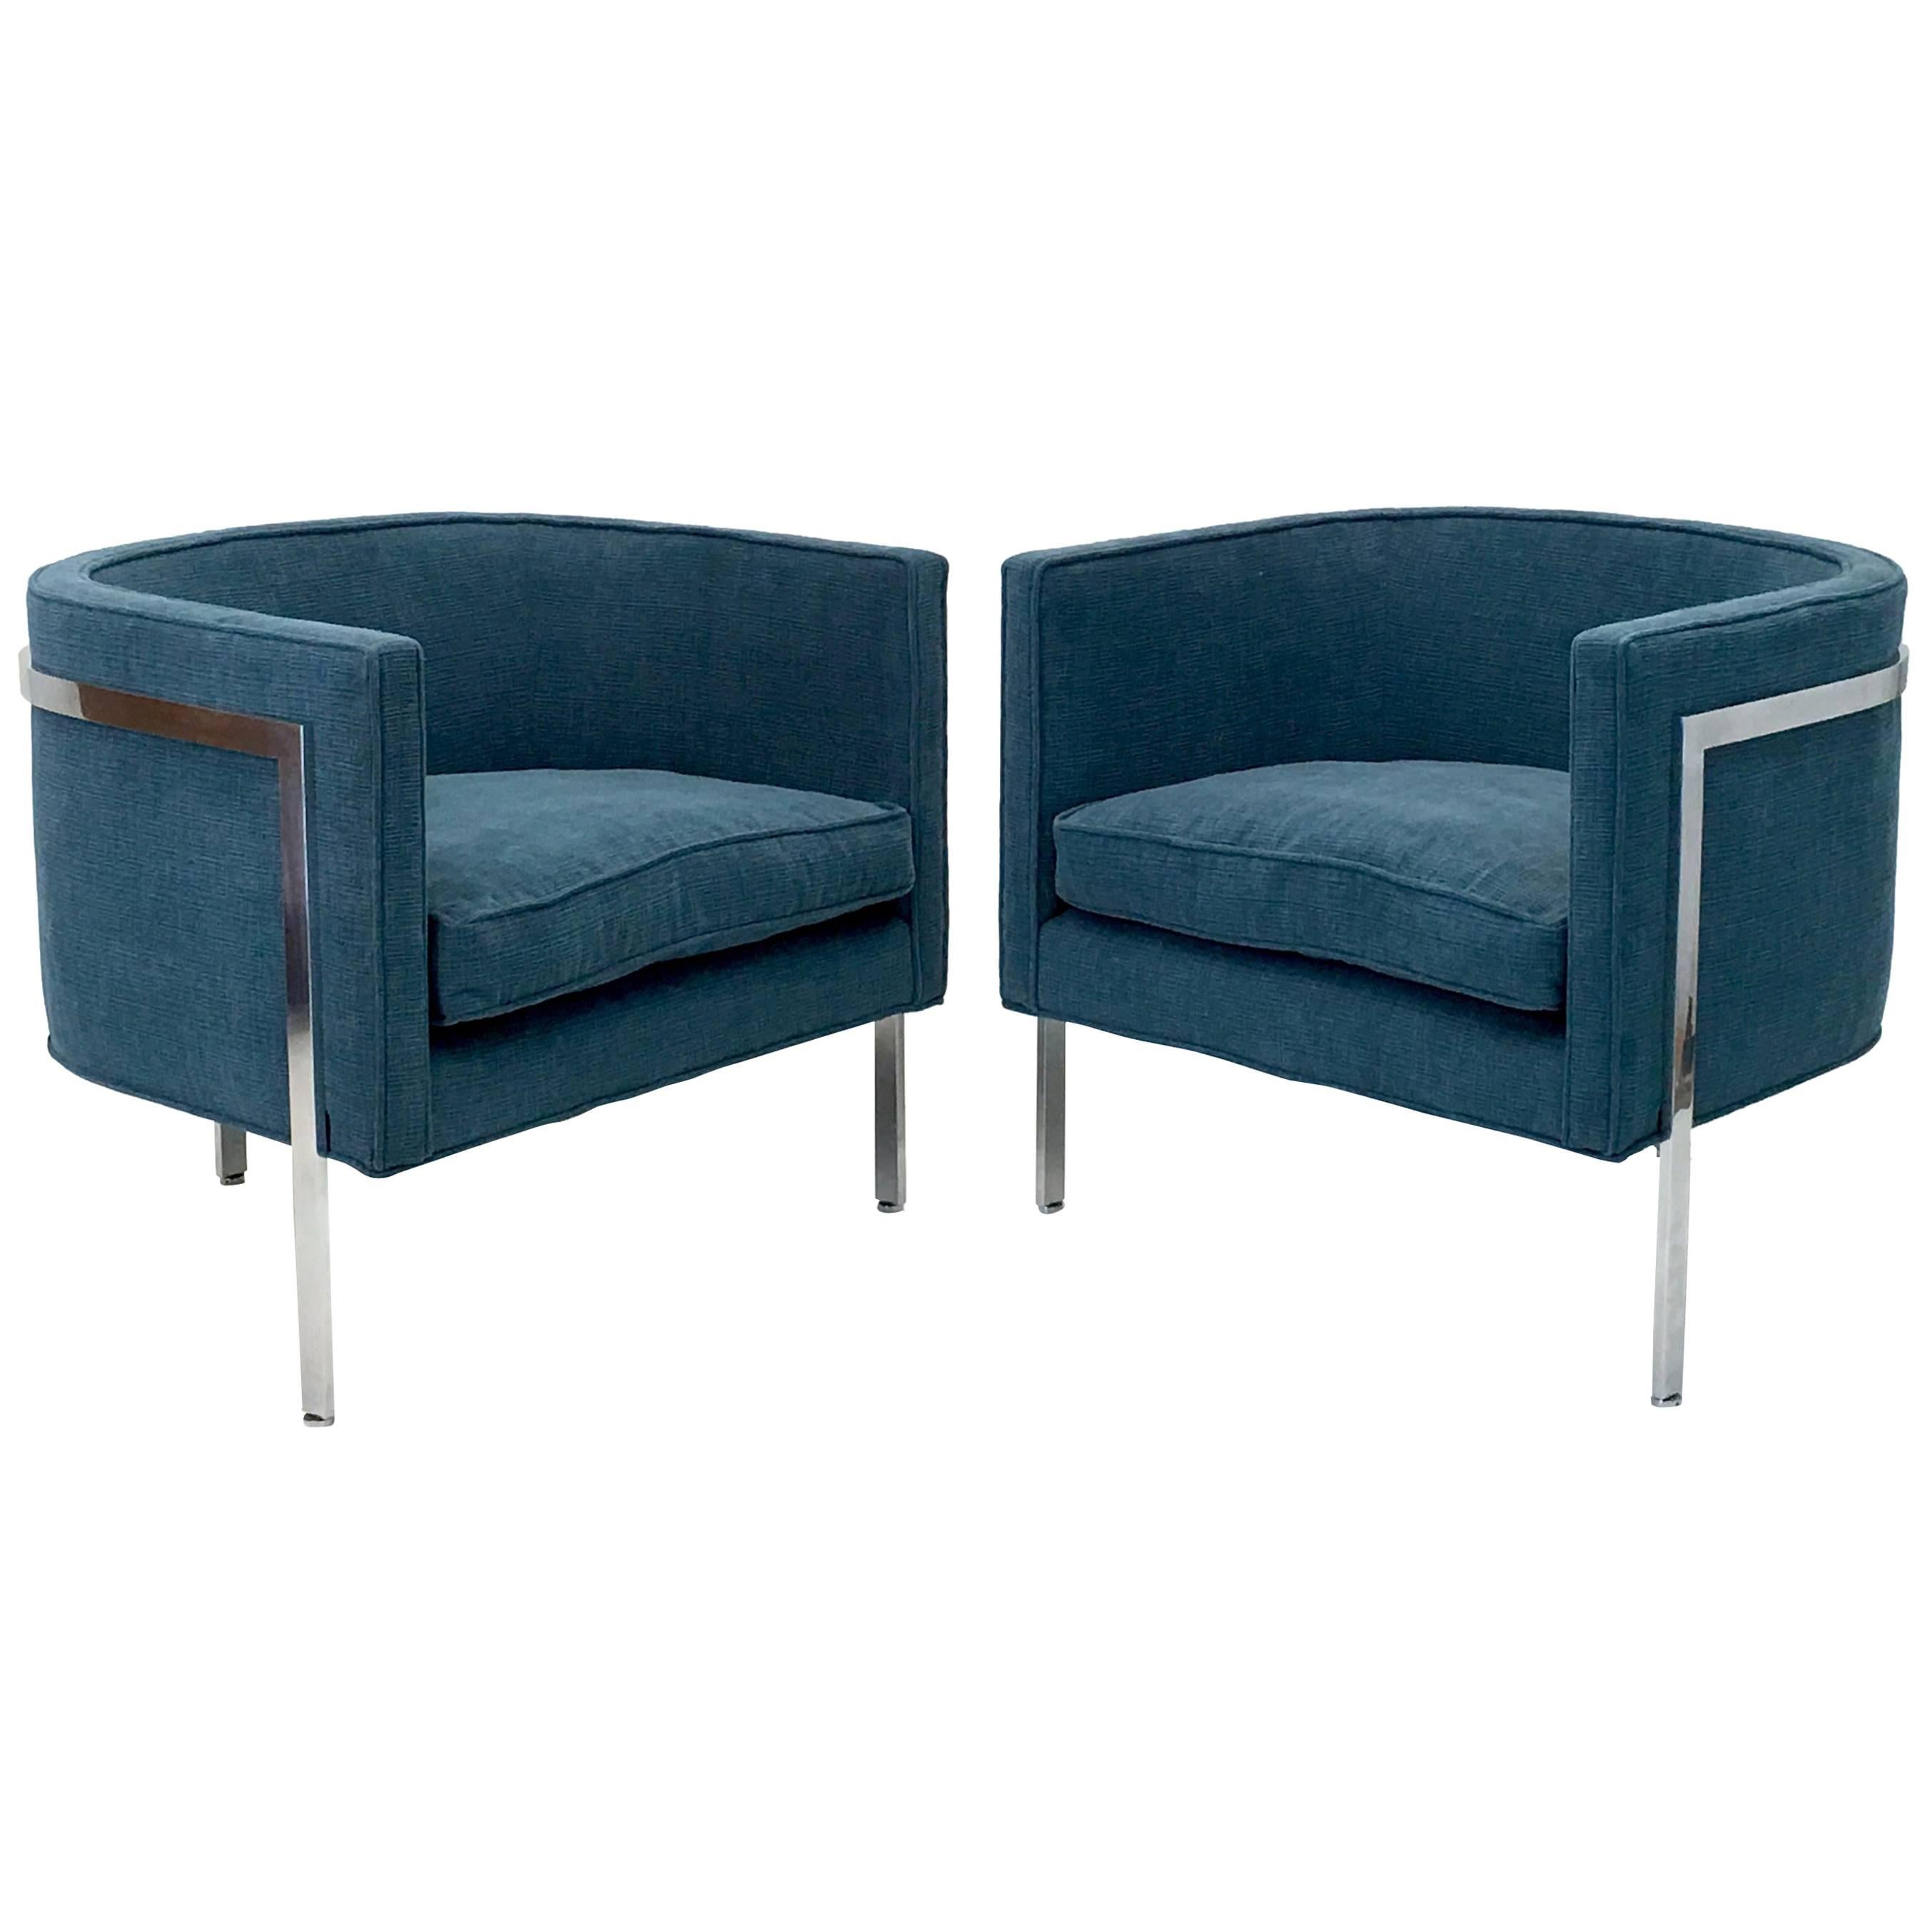 Pair of Signed Harvey Probber Lounge Chairs Model 1347 in Sea Blue